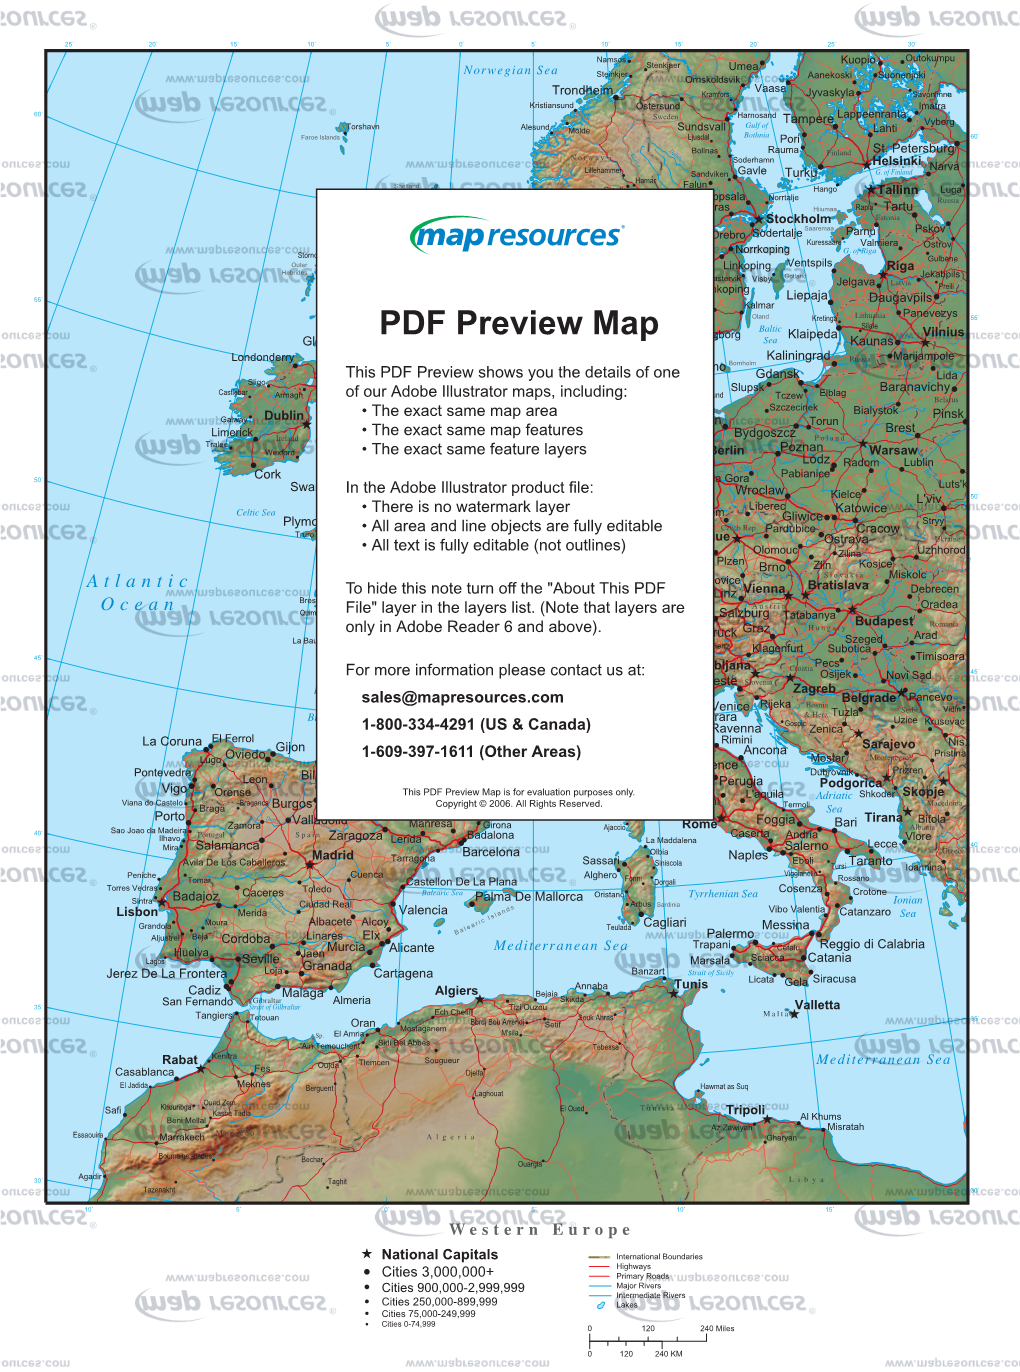 PDF Preview Map Is for Evaluationtoulo Purposesn Only